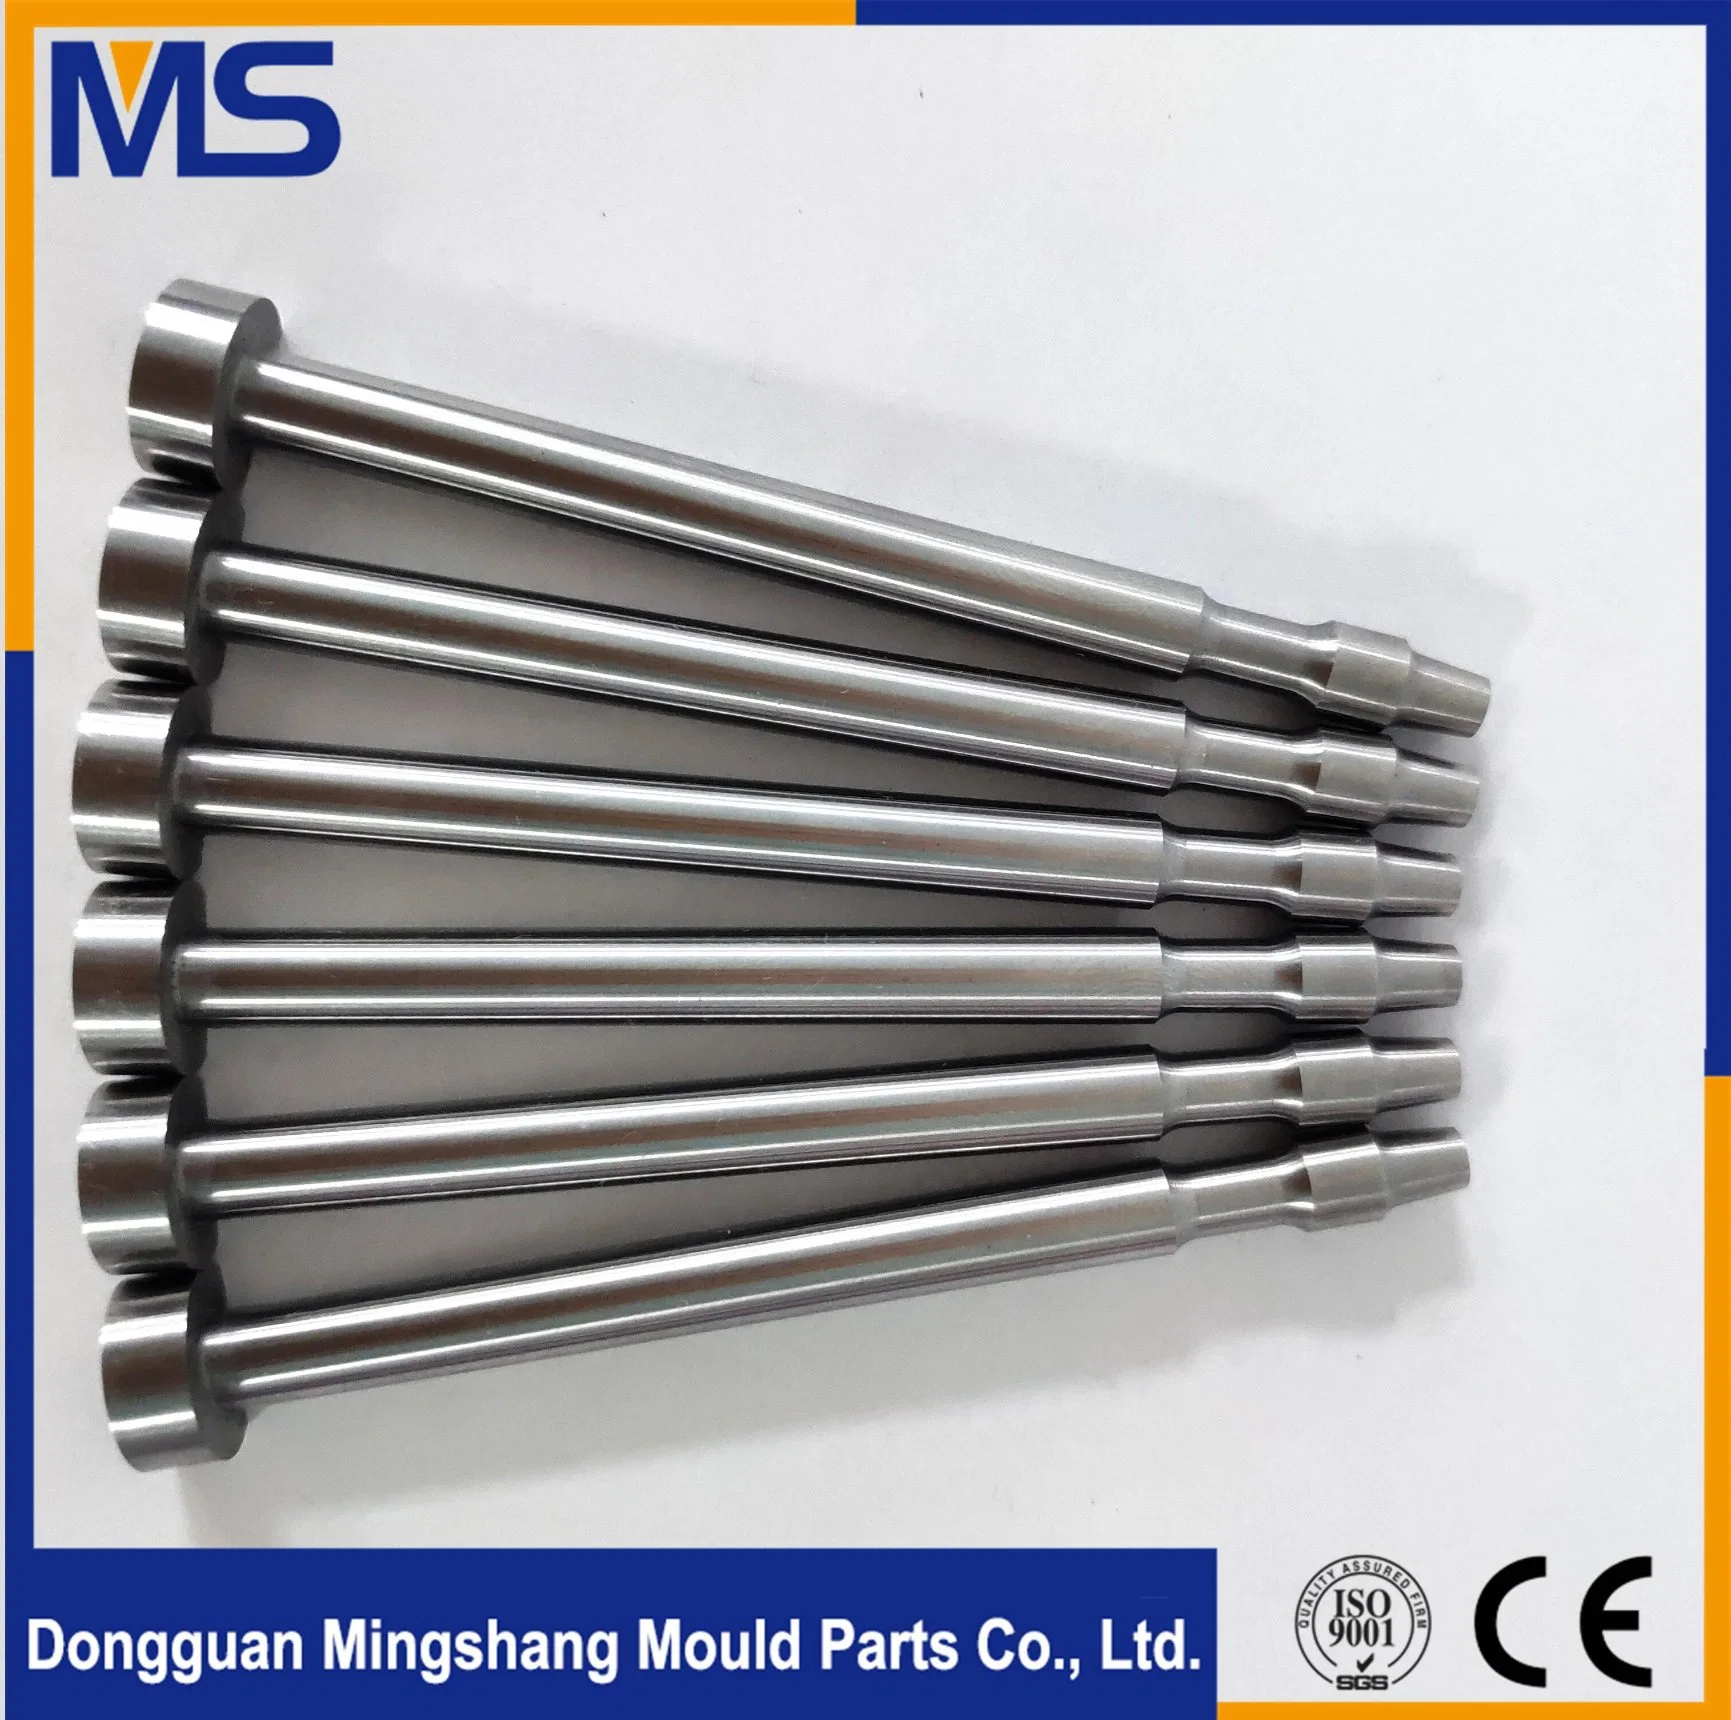 Cylindrical Head Ejector Pins and Sleeves, Precision Ejector Pins Injection Molding Parts